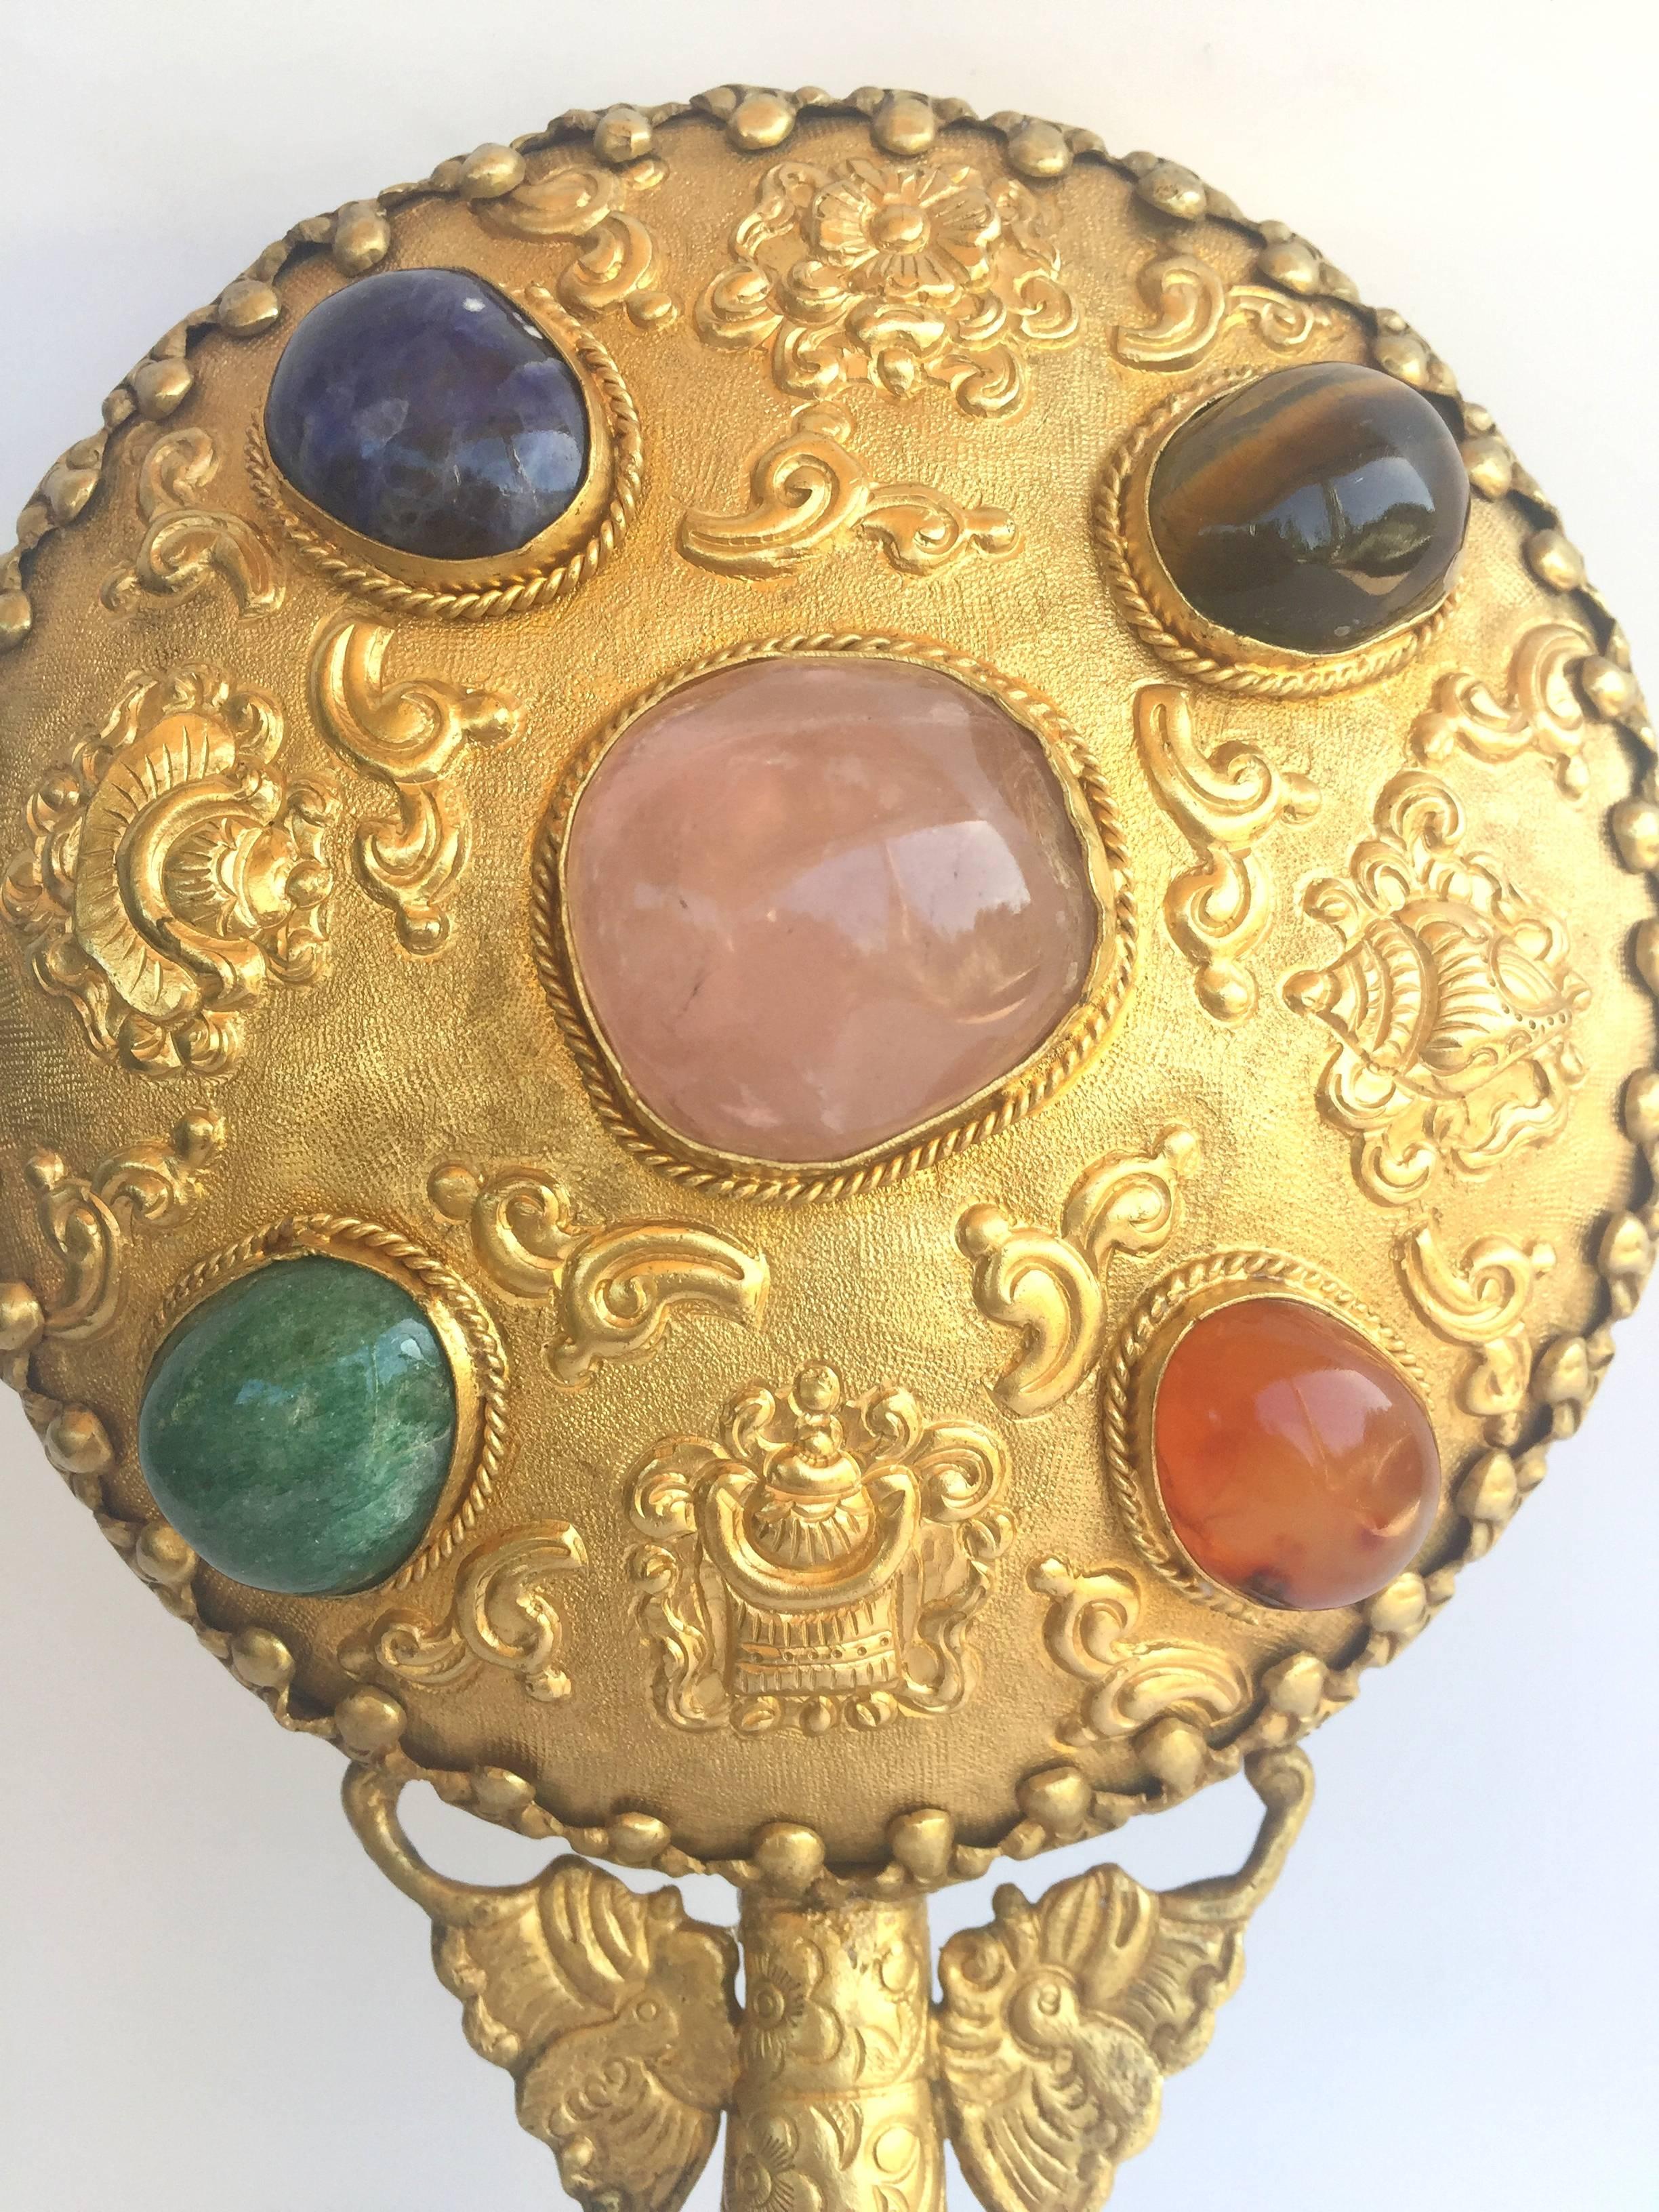 Fantastic mirror engraved with gilded flowers and treasure pots is adorned with 5 very large gem stones of rose quartz, tiger eye, lapis, carnelian and aventurine. The part that connects to the handle forms a butterfly, further enhancing the beauty